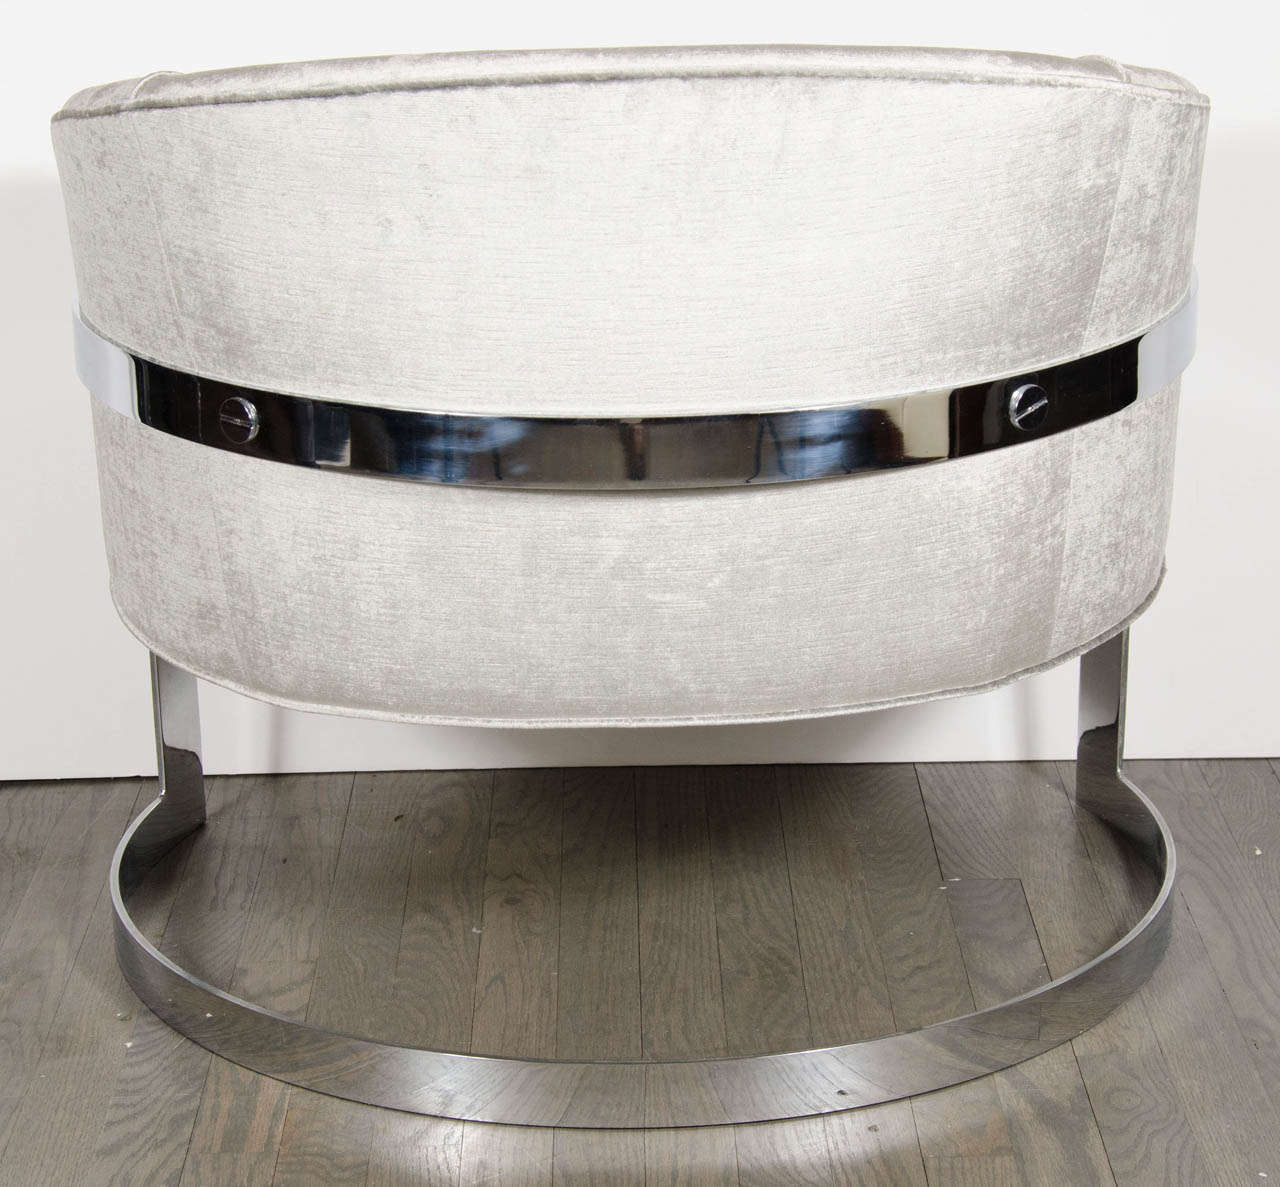 American Mid-Century Modern Pair of Modernist Semi-Circular Chrome Banded Occasional Chairs by Milo Baughman